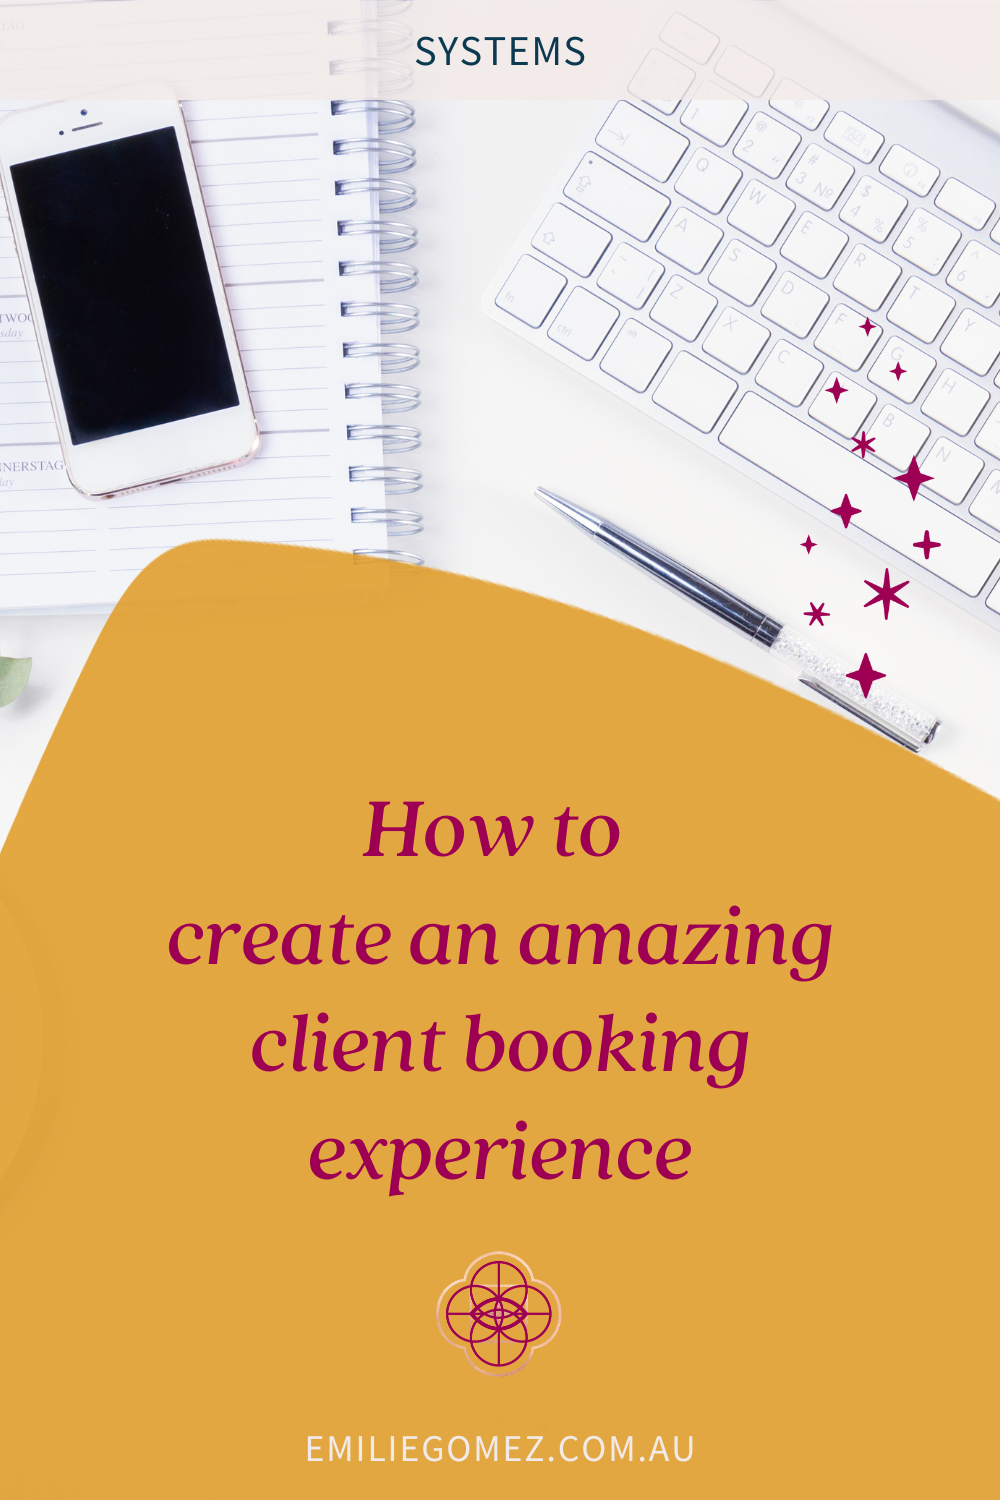 Are you a new entrepreneur wondering how to set up your client booking process? I’m sharing 9 ways to create an amazing client booking experience in your business. If you don’t have these elements in your booking systems, you risk turning potential clients away if they decide the experience is too hard or complicated. Ensure your client experience is enjoyable right from the start with these 9 must-have tips!